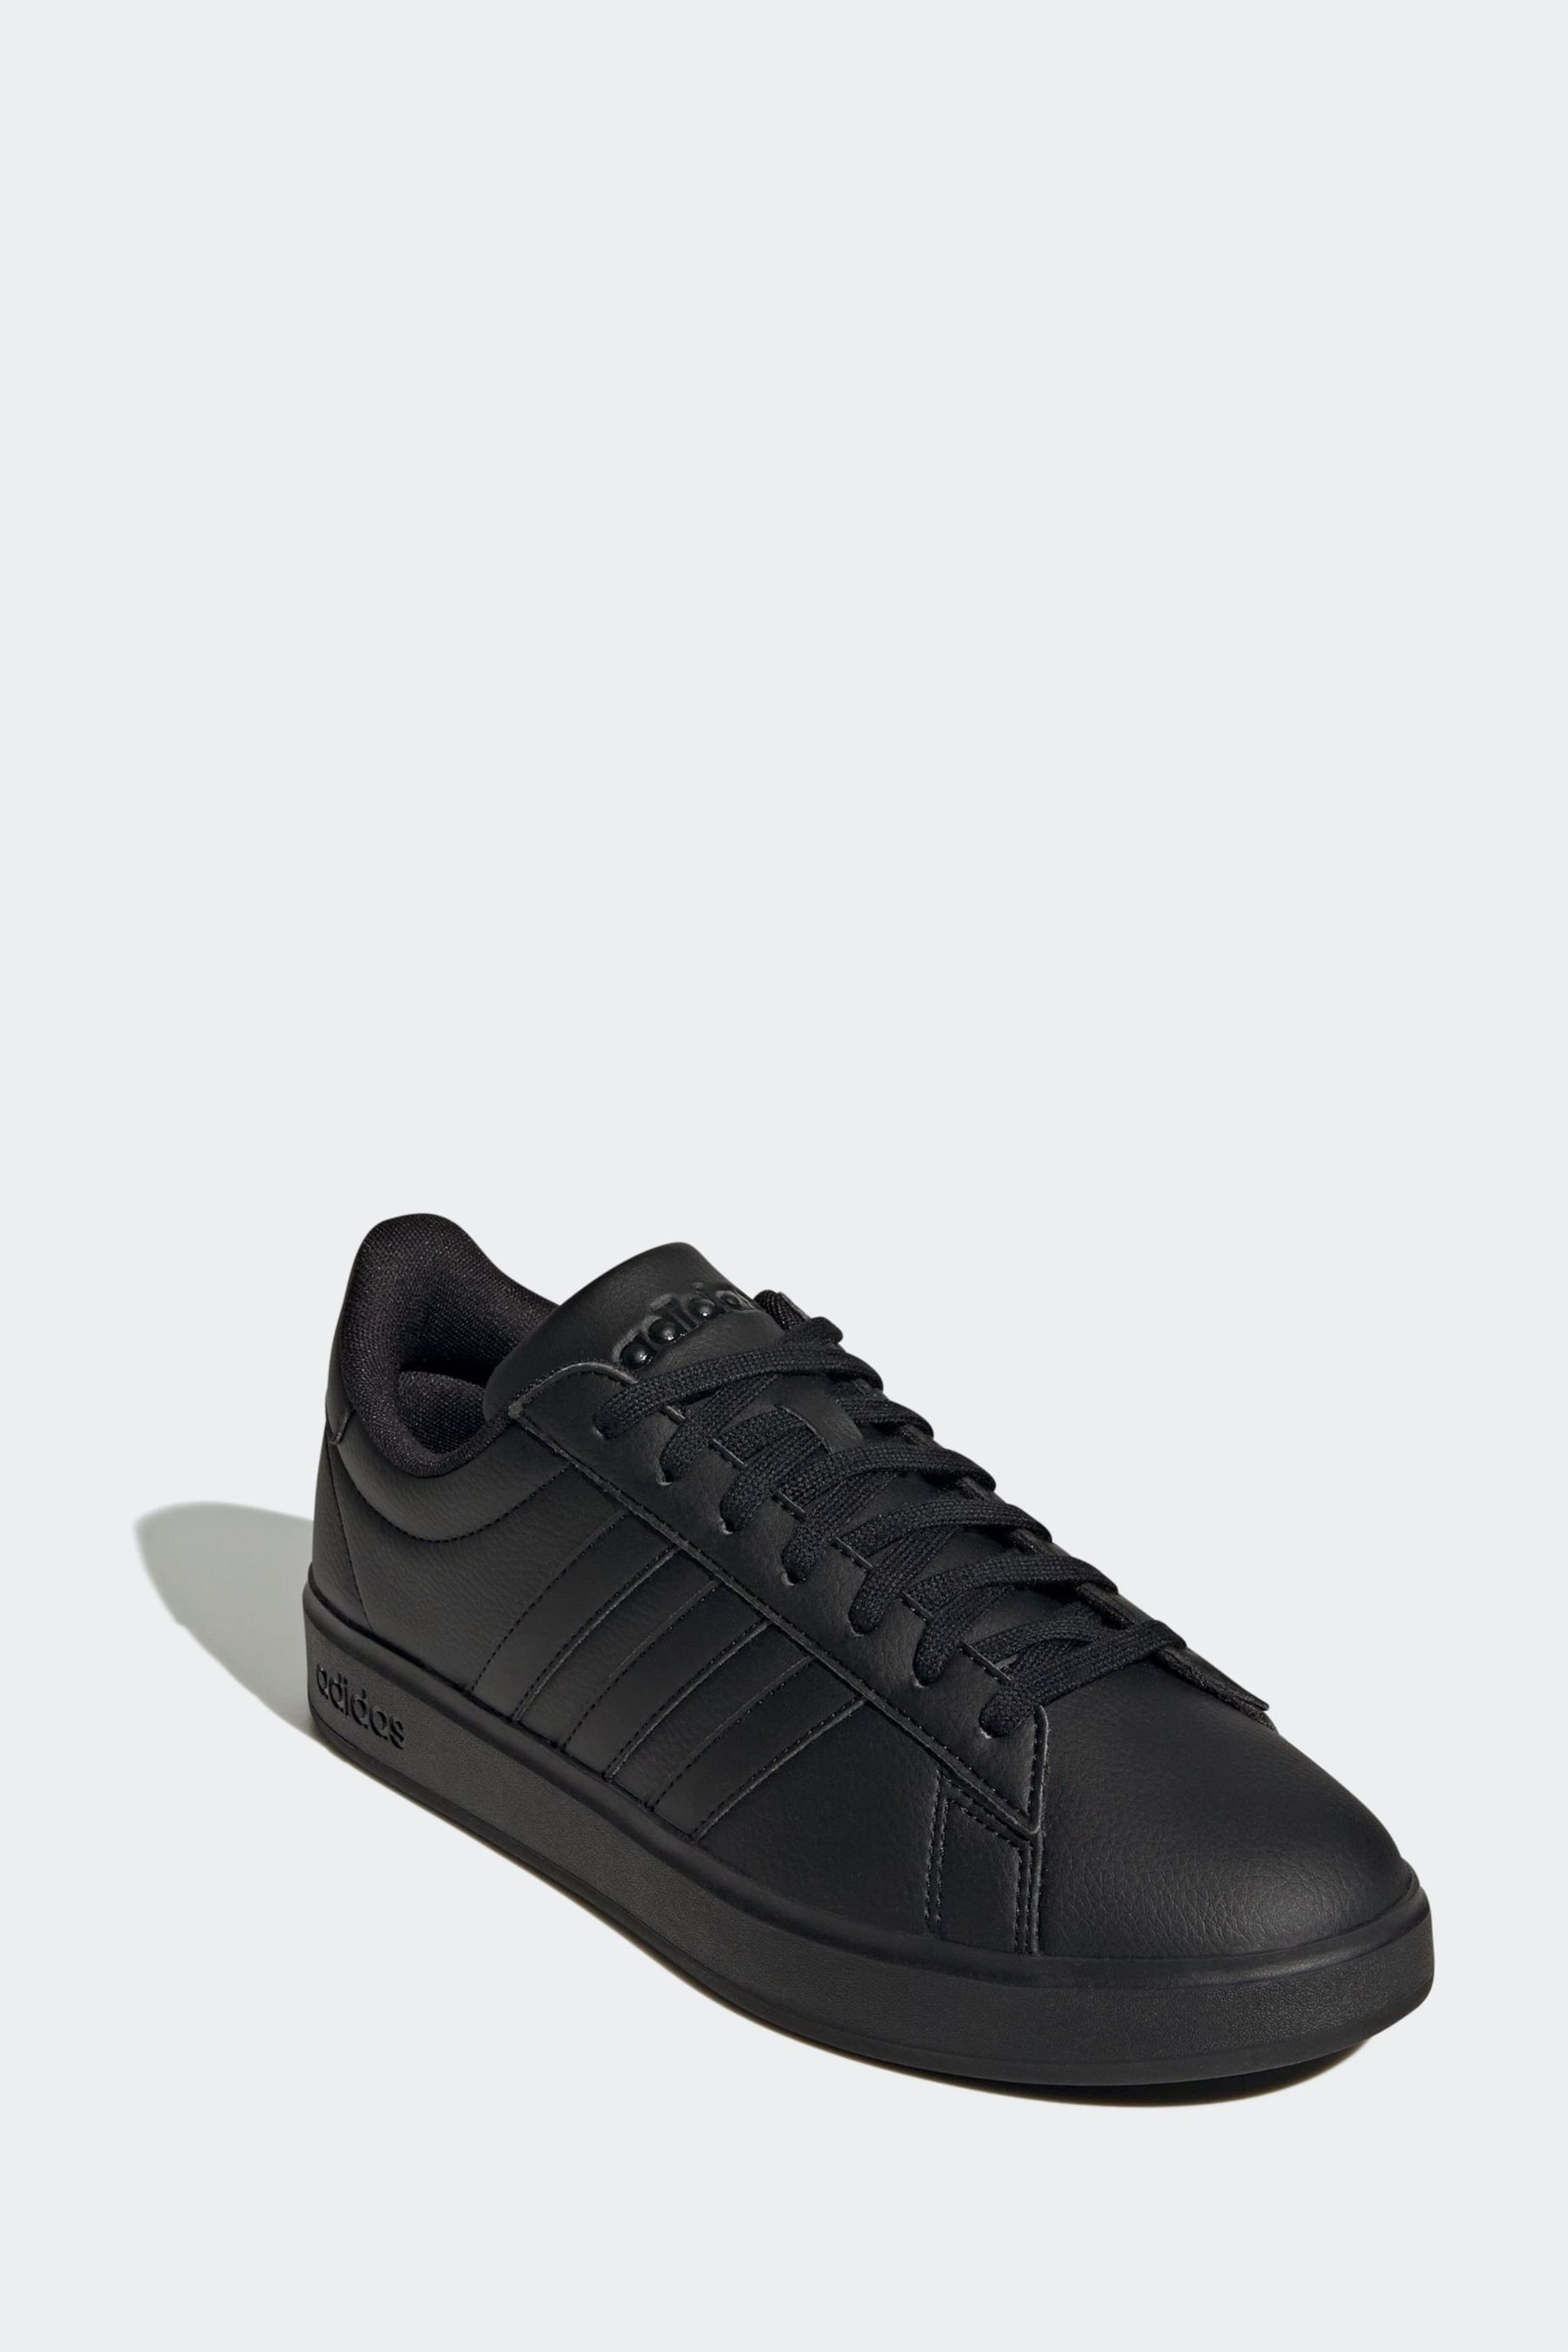 adidas Black Grand Court 2.0 Trainers - Image 3 of 9